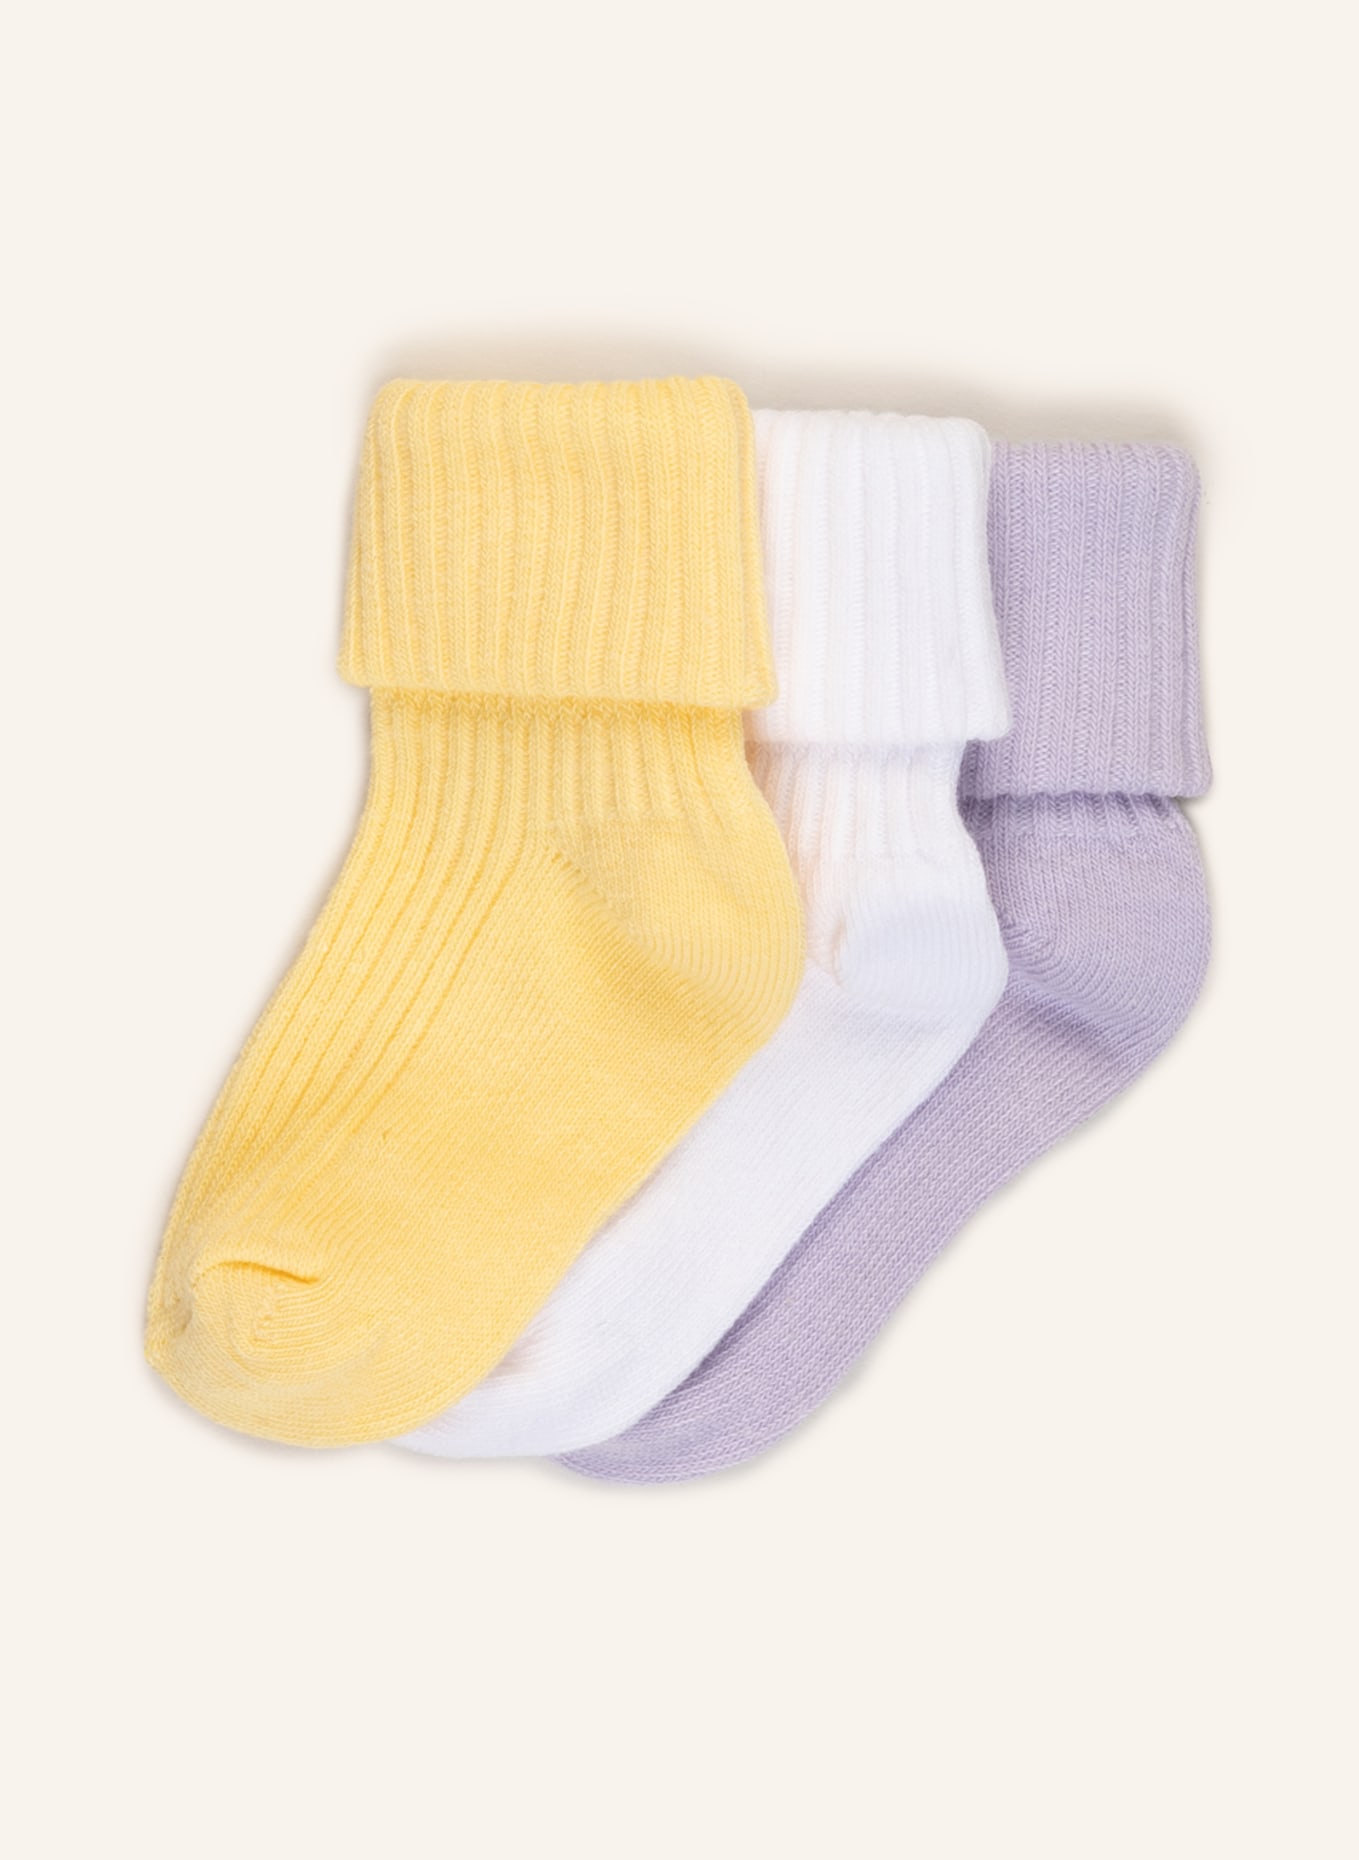 ewers COLLECTION 3-pack socks, Color: 3 3 621-716-901 (Image 1)